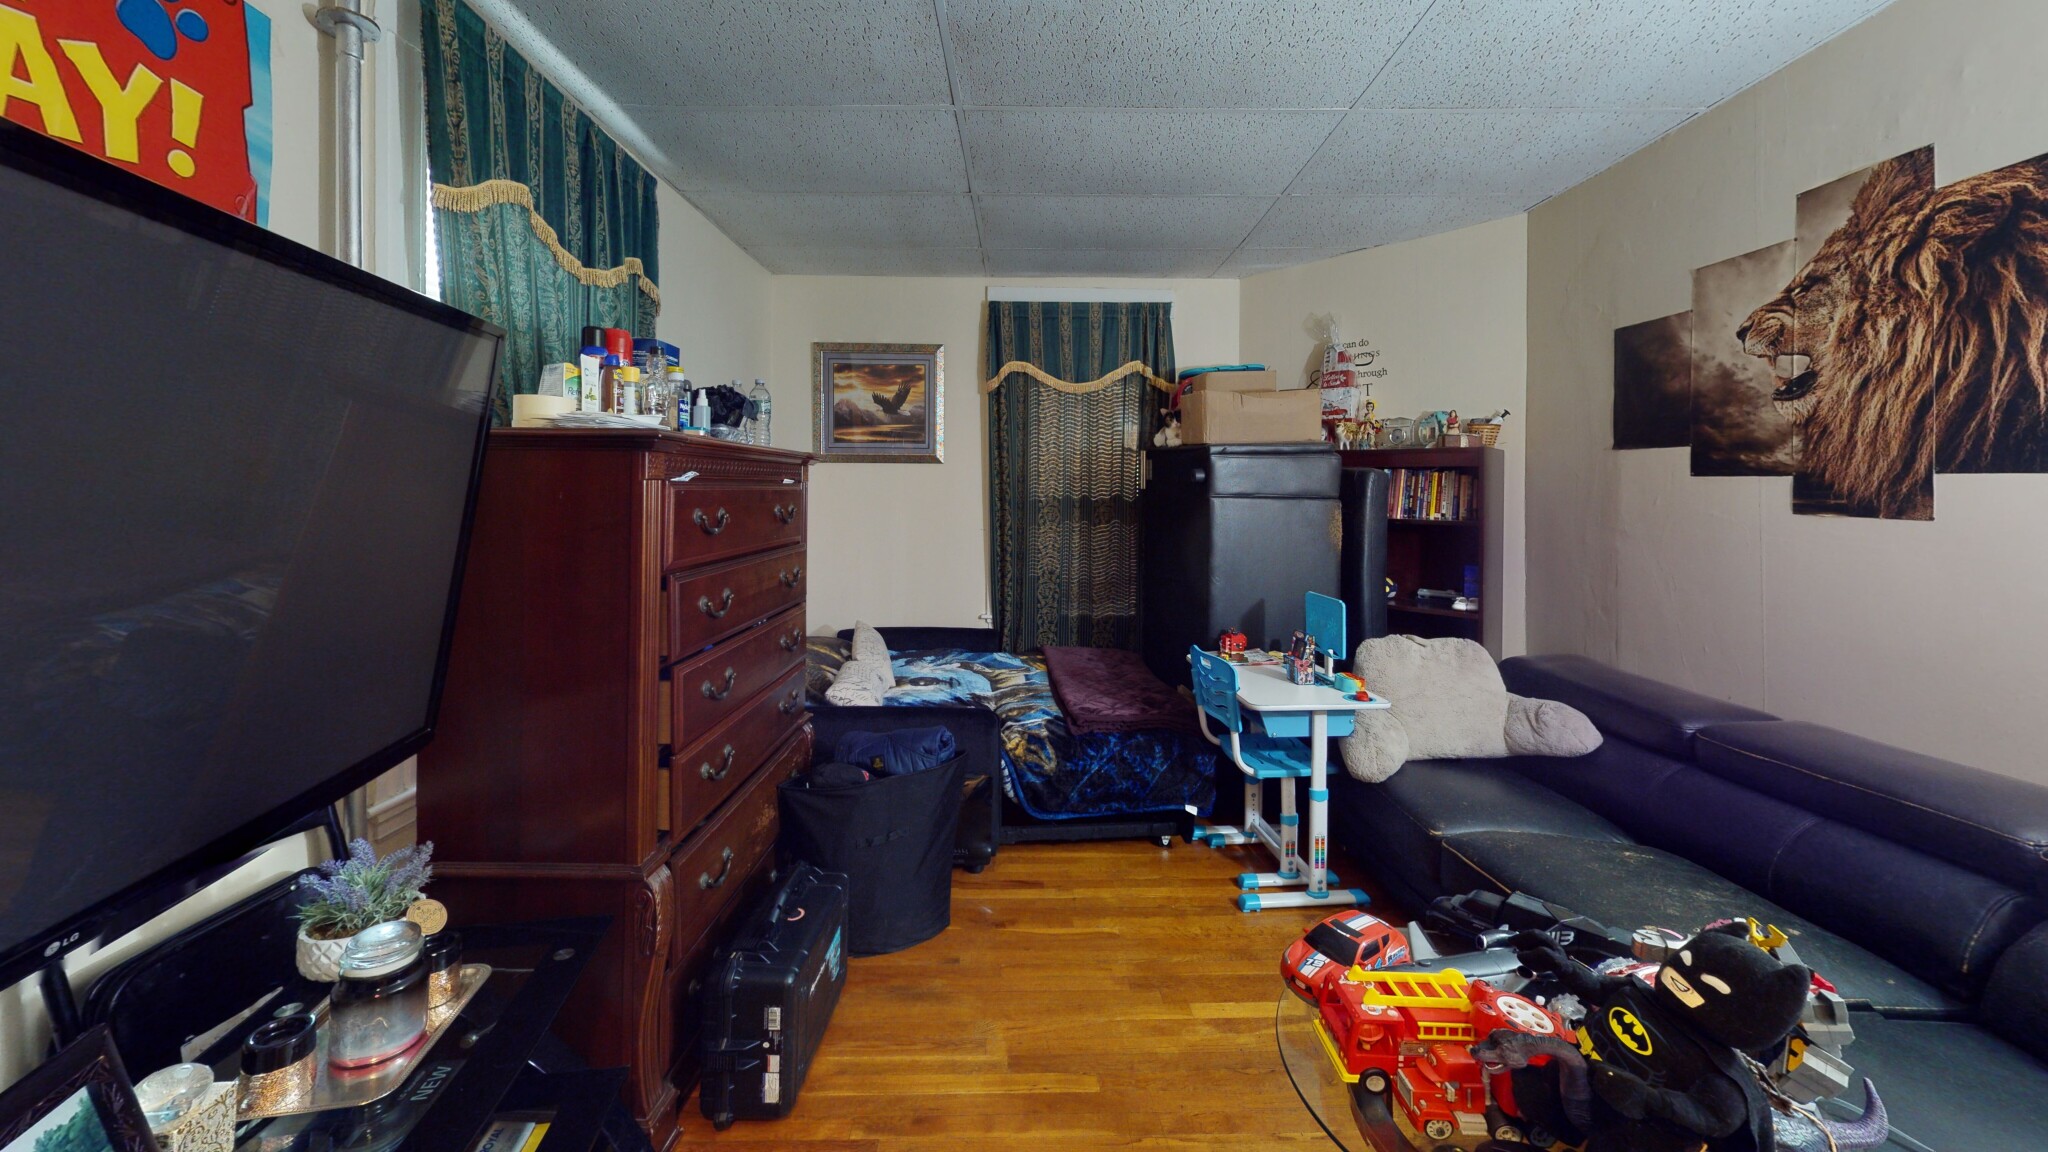 Photos of apartment on Plymouth St.,Everett MA 02149